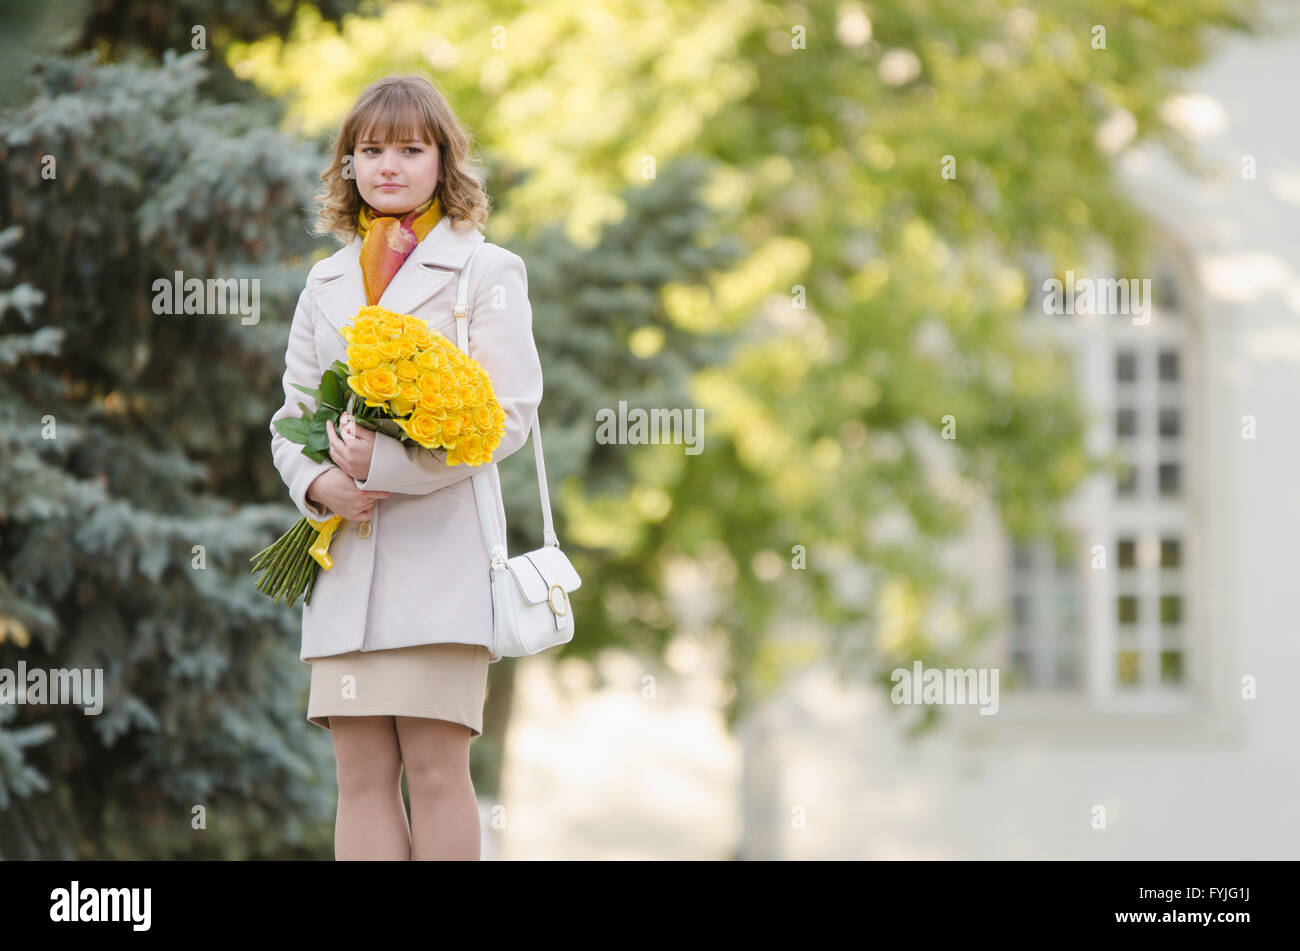 Cute little girl with a bouquet of yellow roses walks in the park Stock Photo